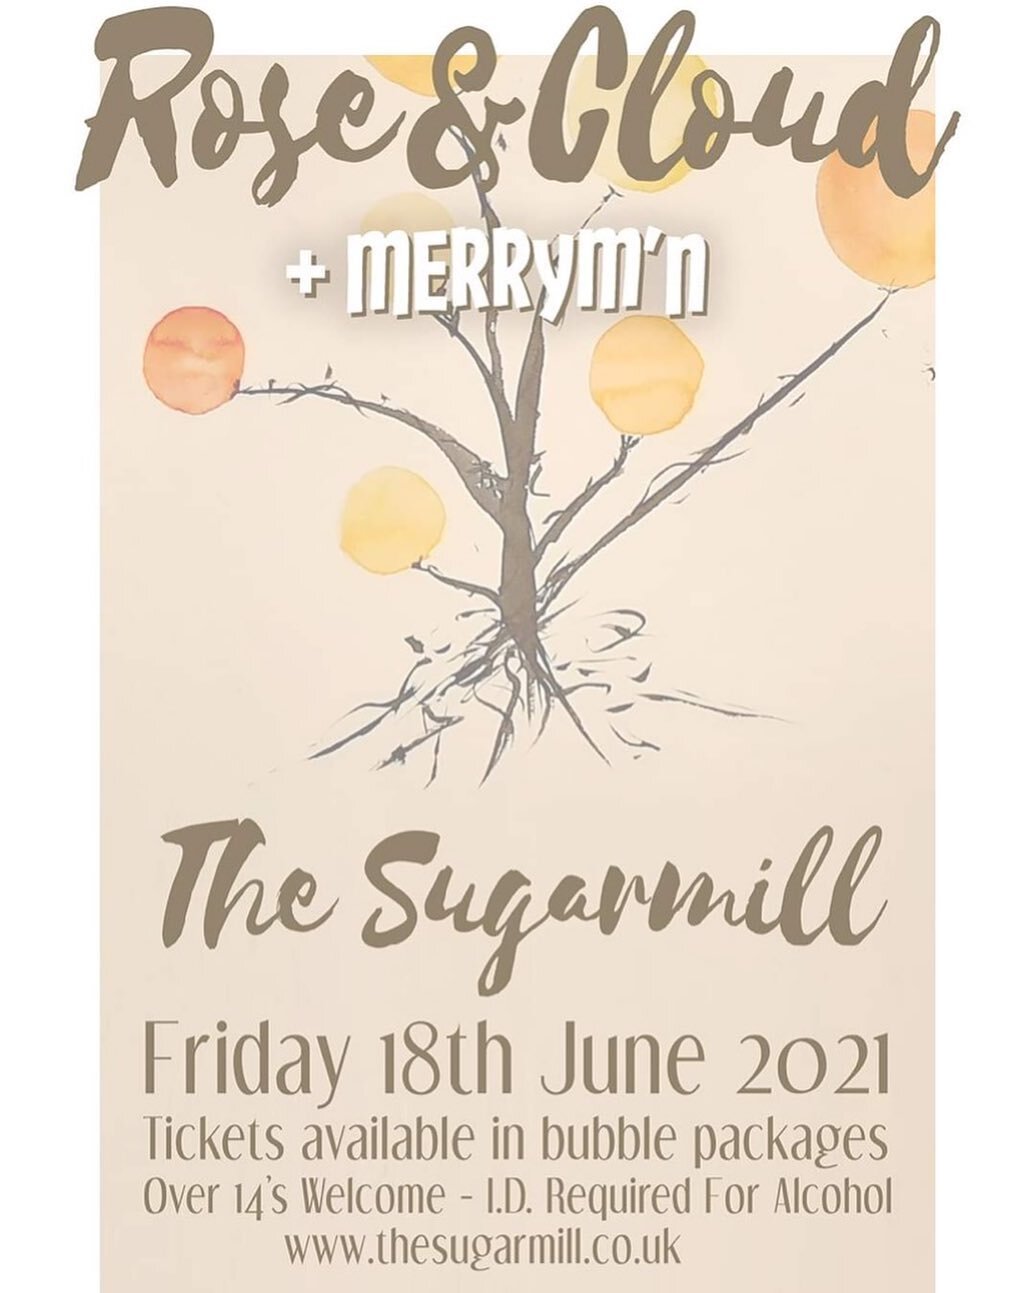 Hello you beaming sillies, how are you?

We are so blimmin&rsquo; excited and delighted and... something else that rhymes... to be able to ask you to join us for a socially distanced Sugarmill party with @merrym_n!

Seated tickets are available for a